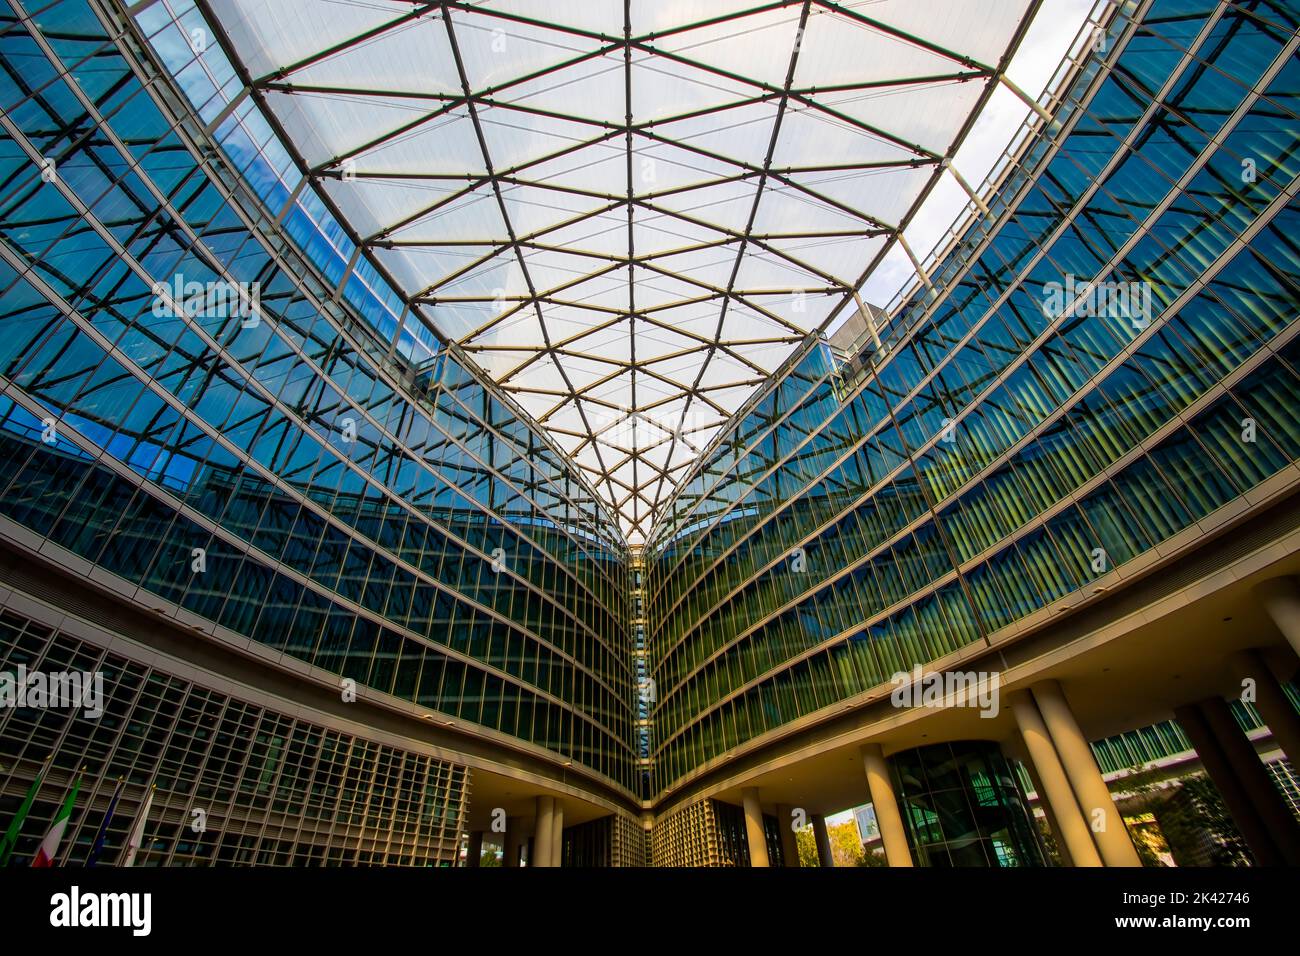 The magnificent roof of Palazzo Lombardia in Milan, Italy Stock Photo